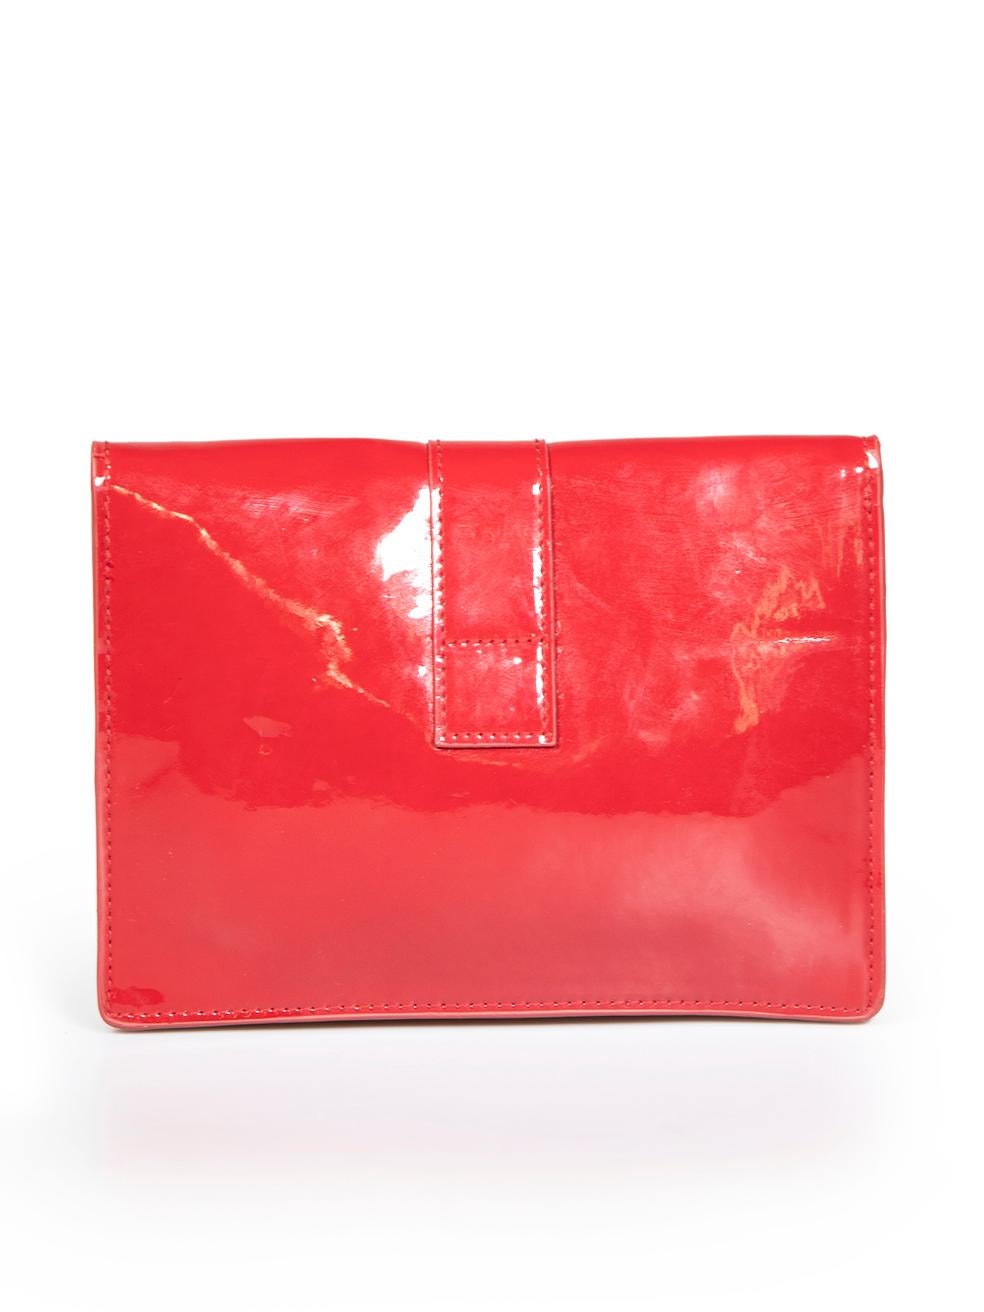 Miu Miu Red Patent Leather Petite Pochette In Excellent Condition For Sale In London, GB